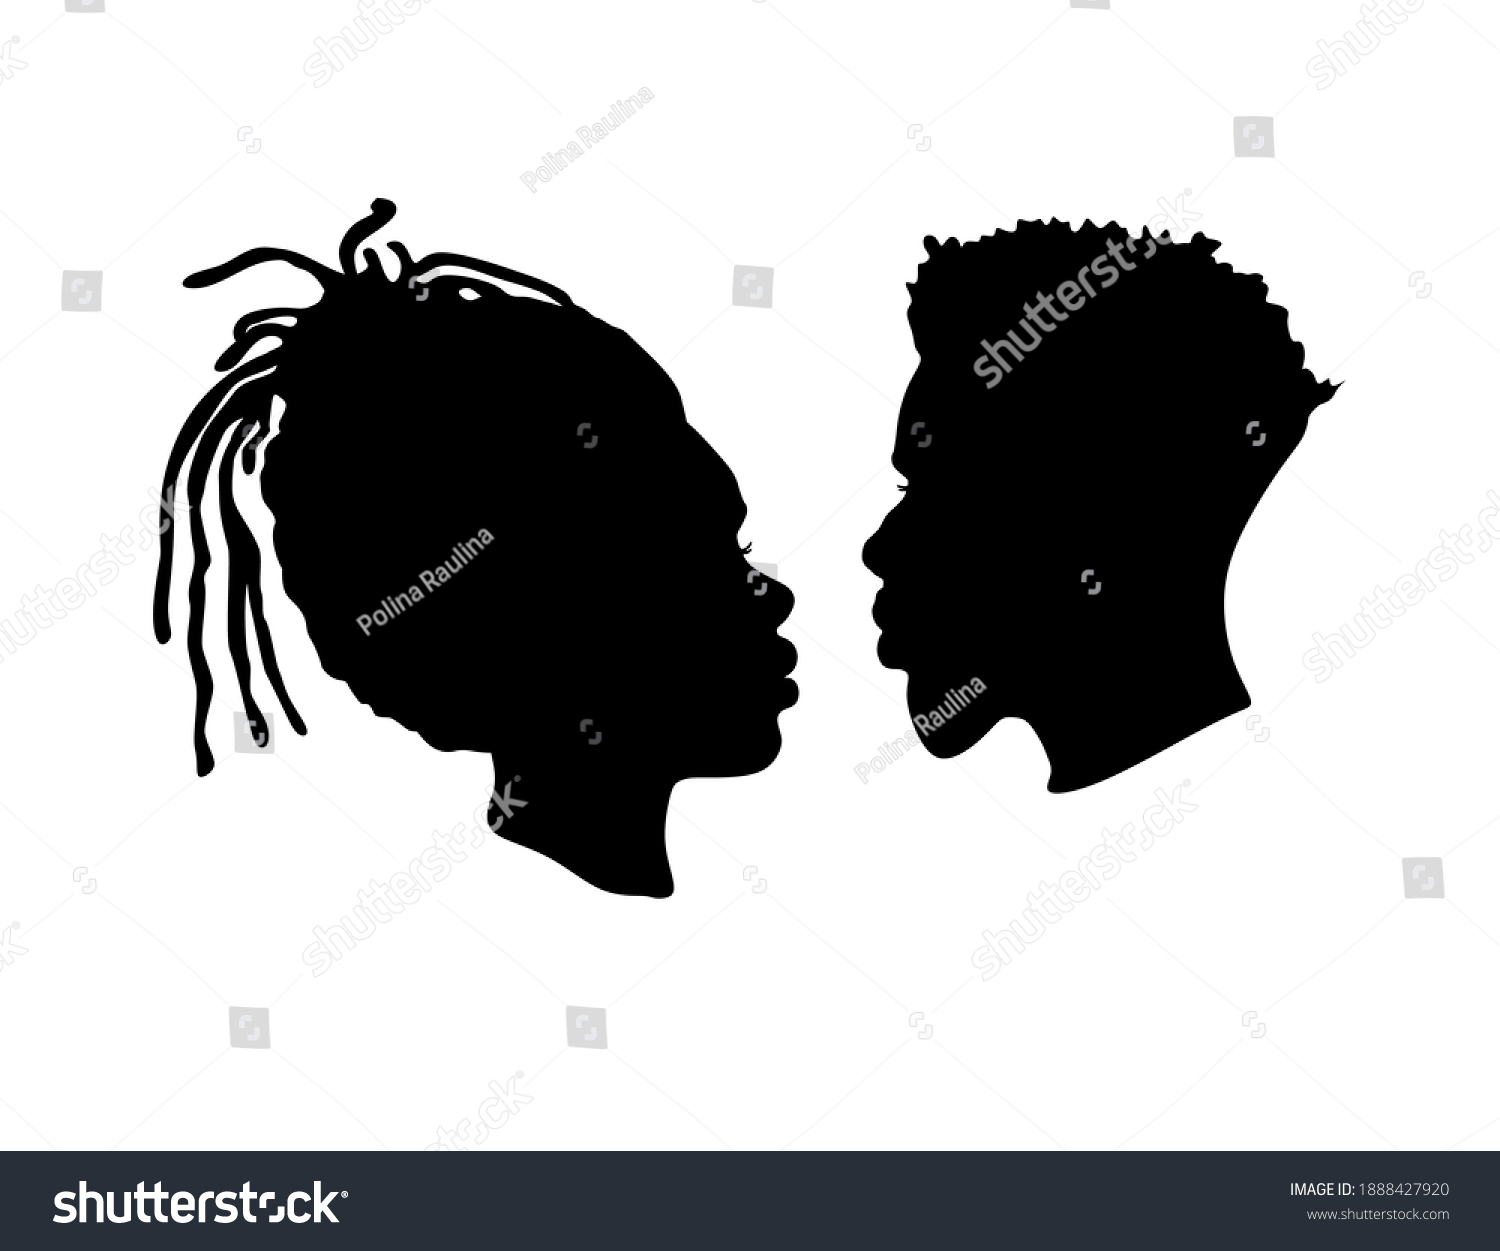 SVG of African American Afro female, male face vector silhouettes. Black couple portraits for wedding romantic design.Profile man and woman head drawing illustration with hairstyles of dreadlocks.Human love svg